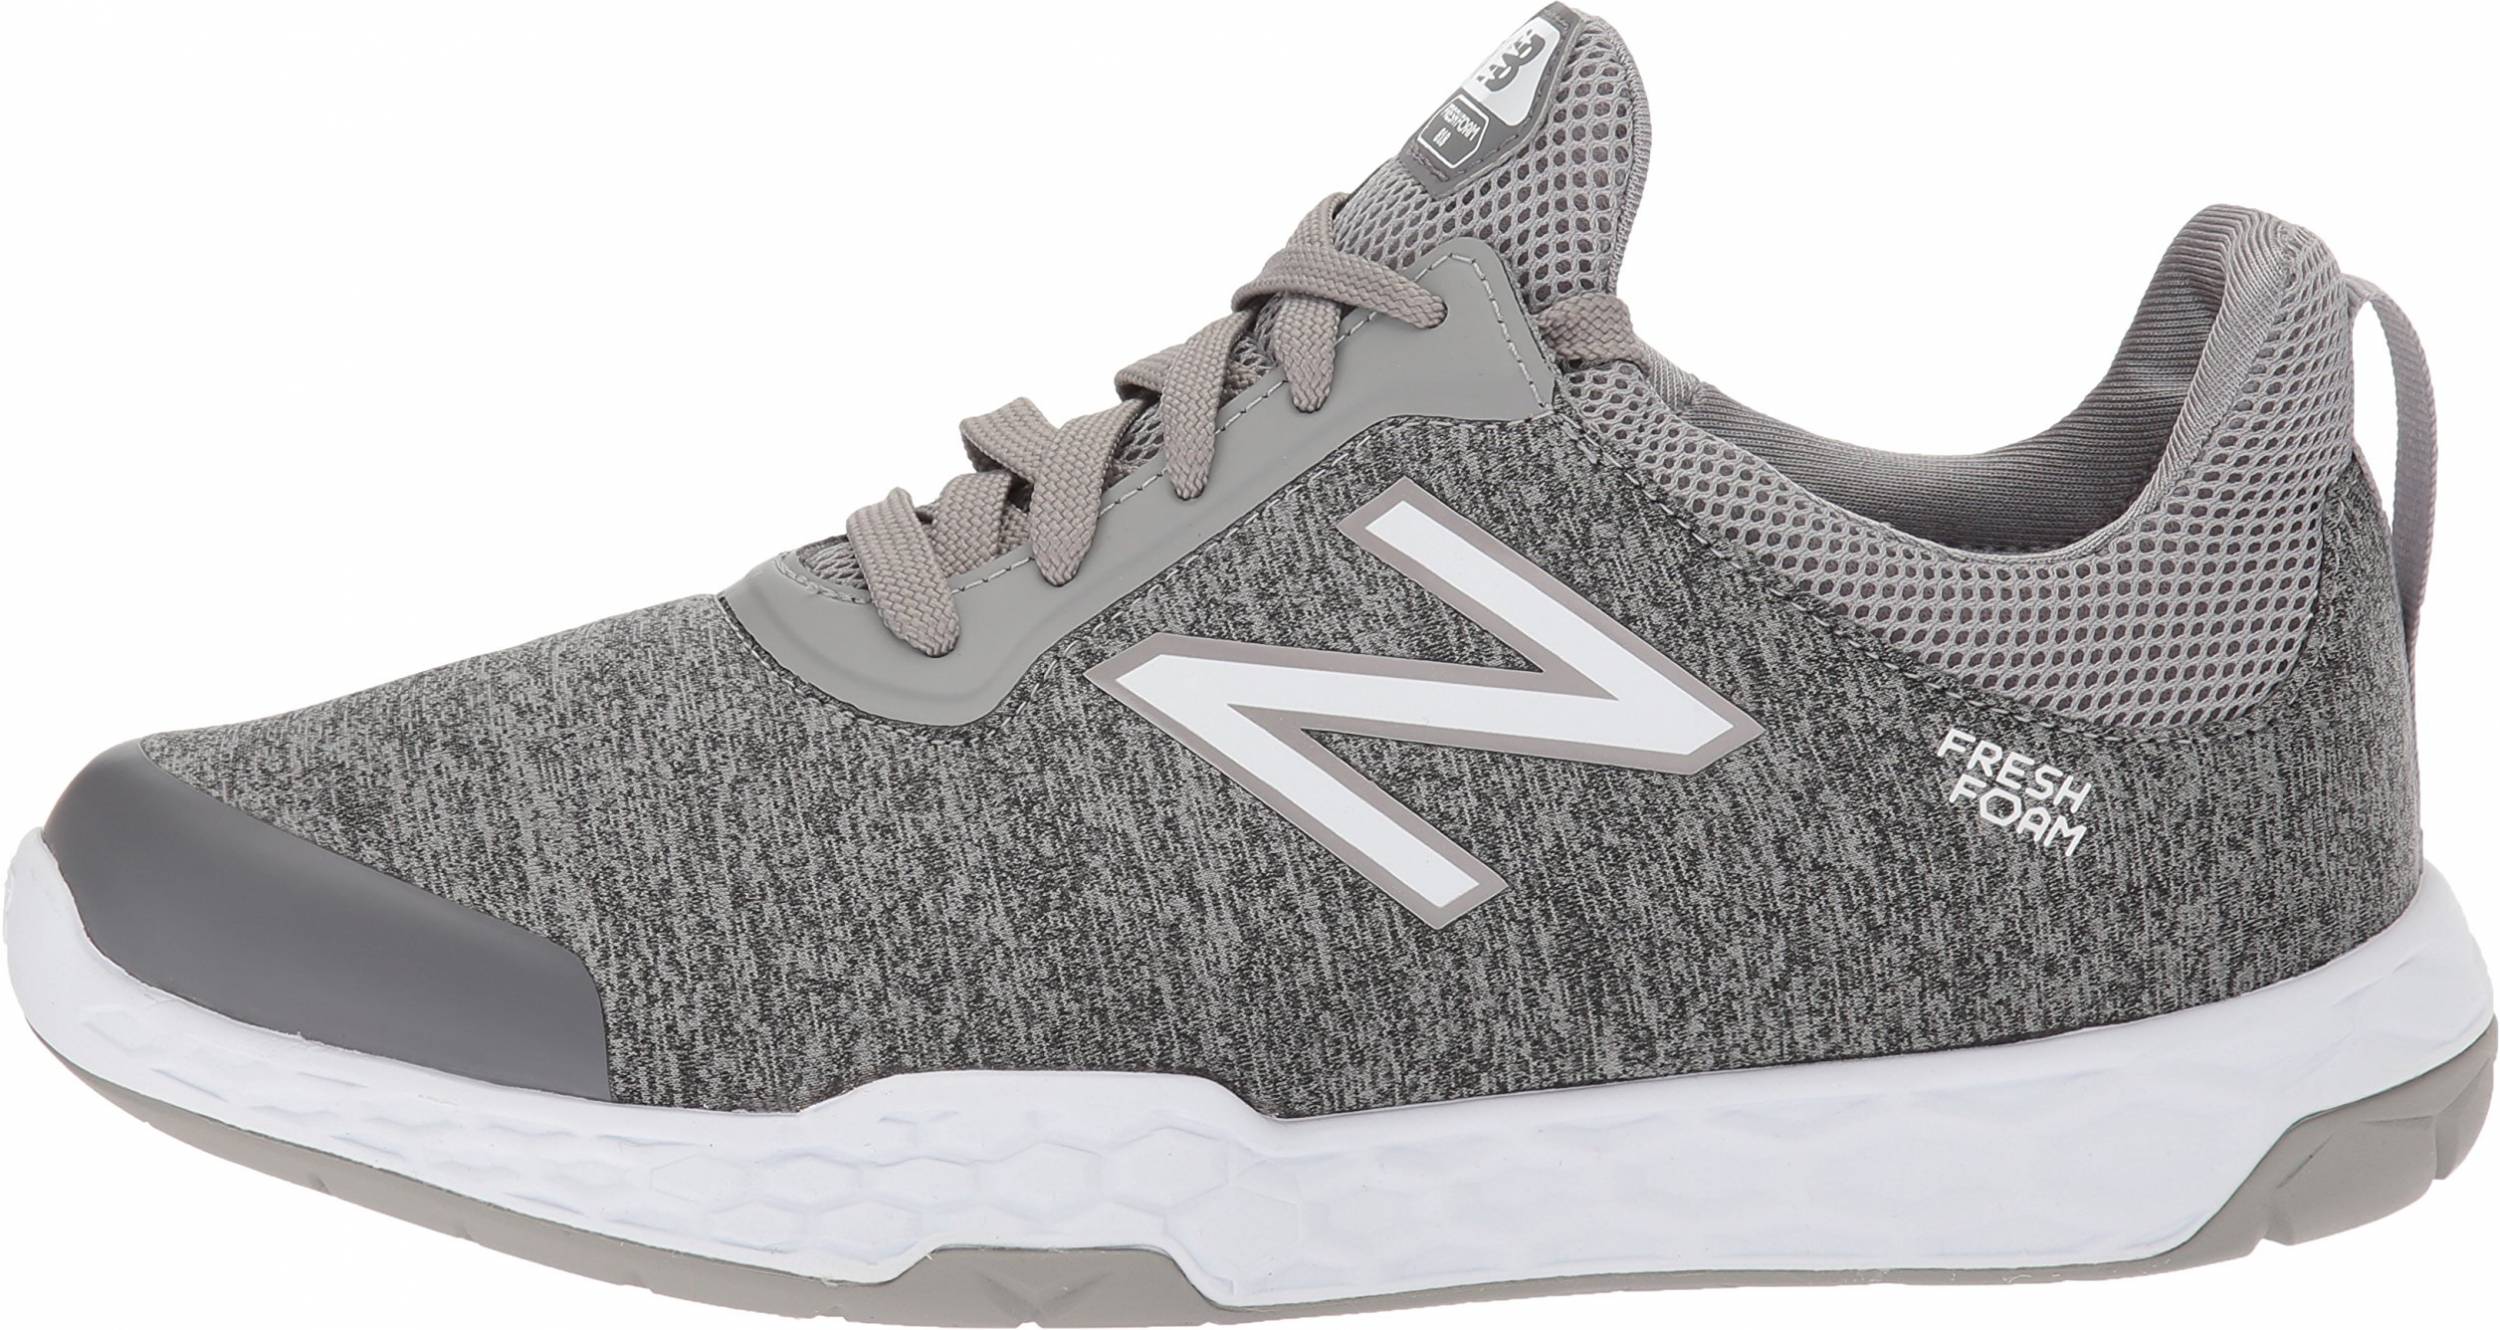 Save 52% on New Balance Workout Shoes 